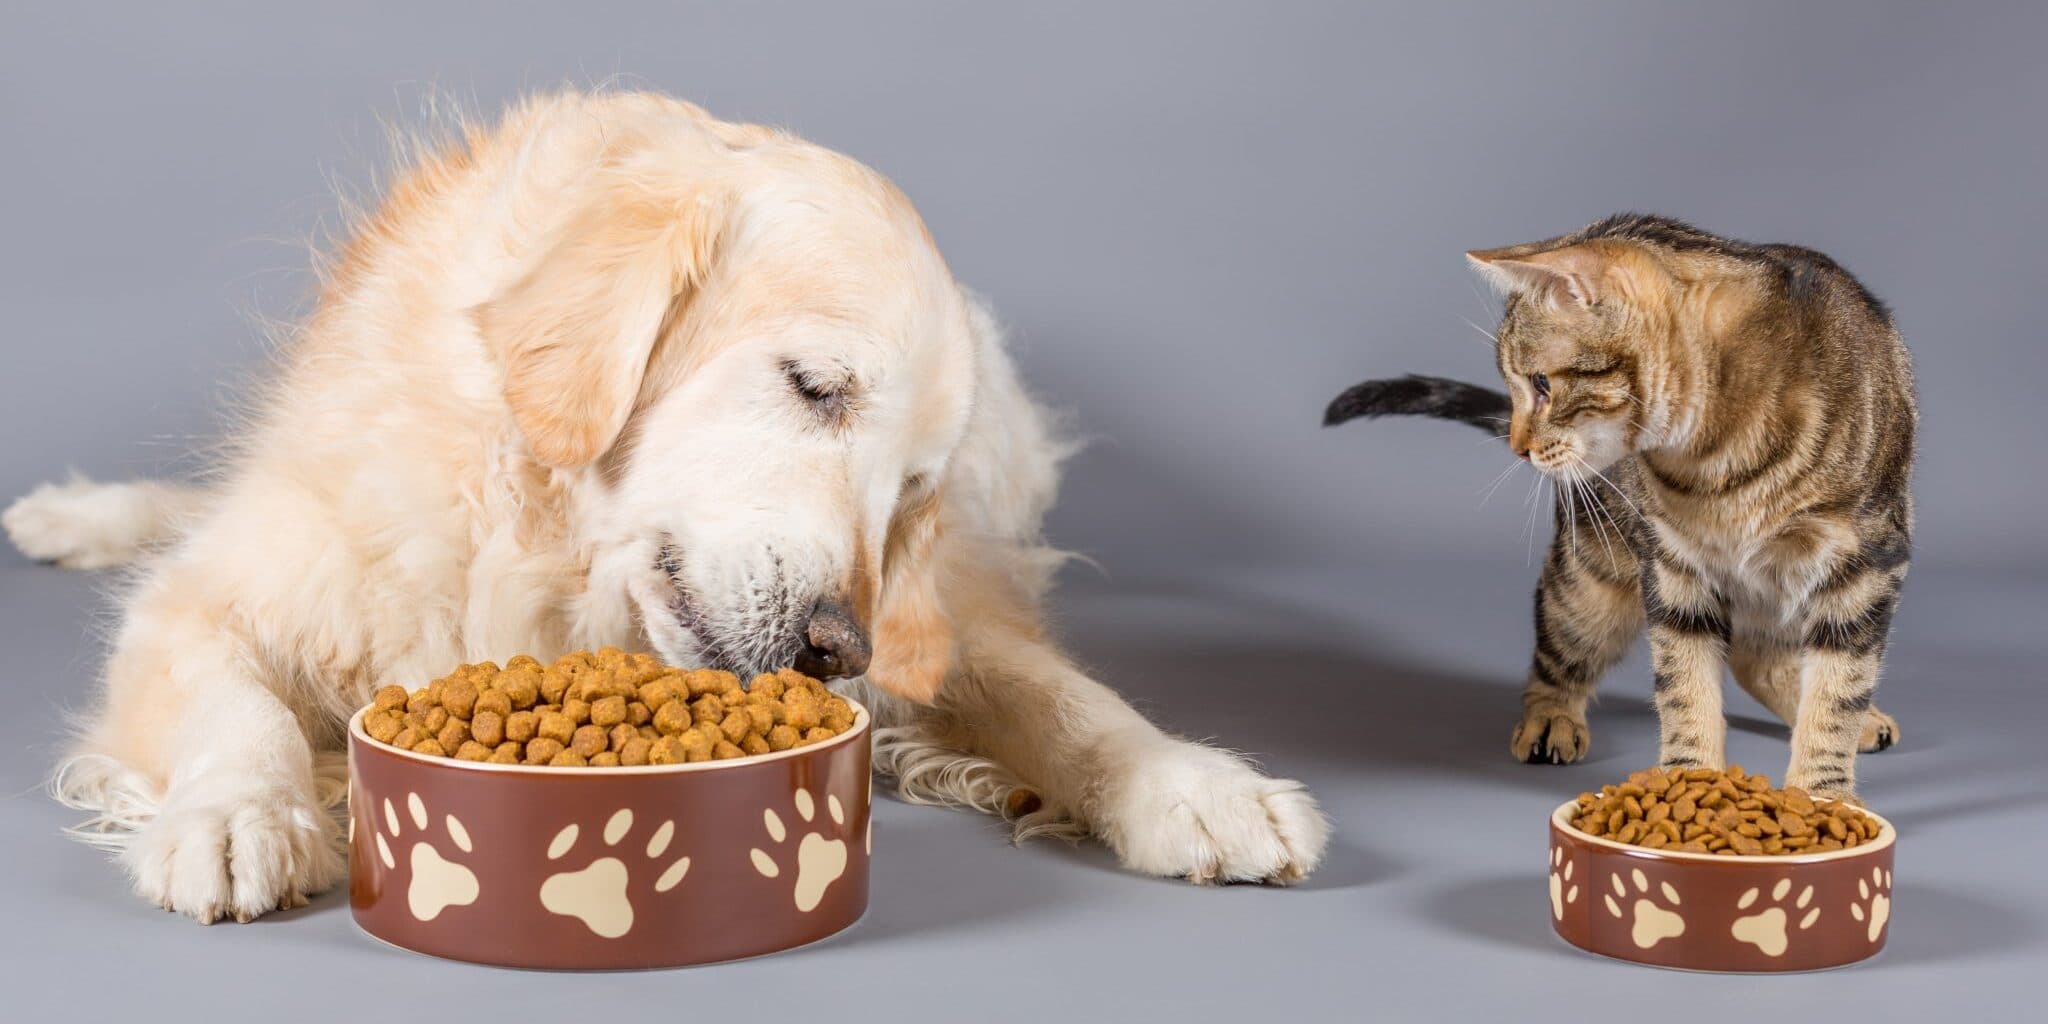 Is it ok to feed cats with dog food Can Cats Eat Dog Food? [Is This Safe]